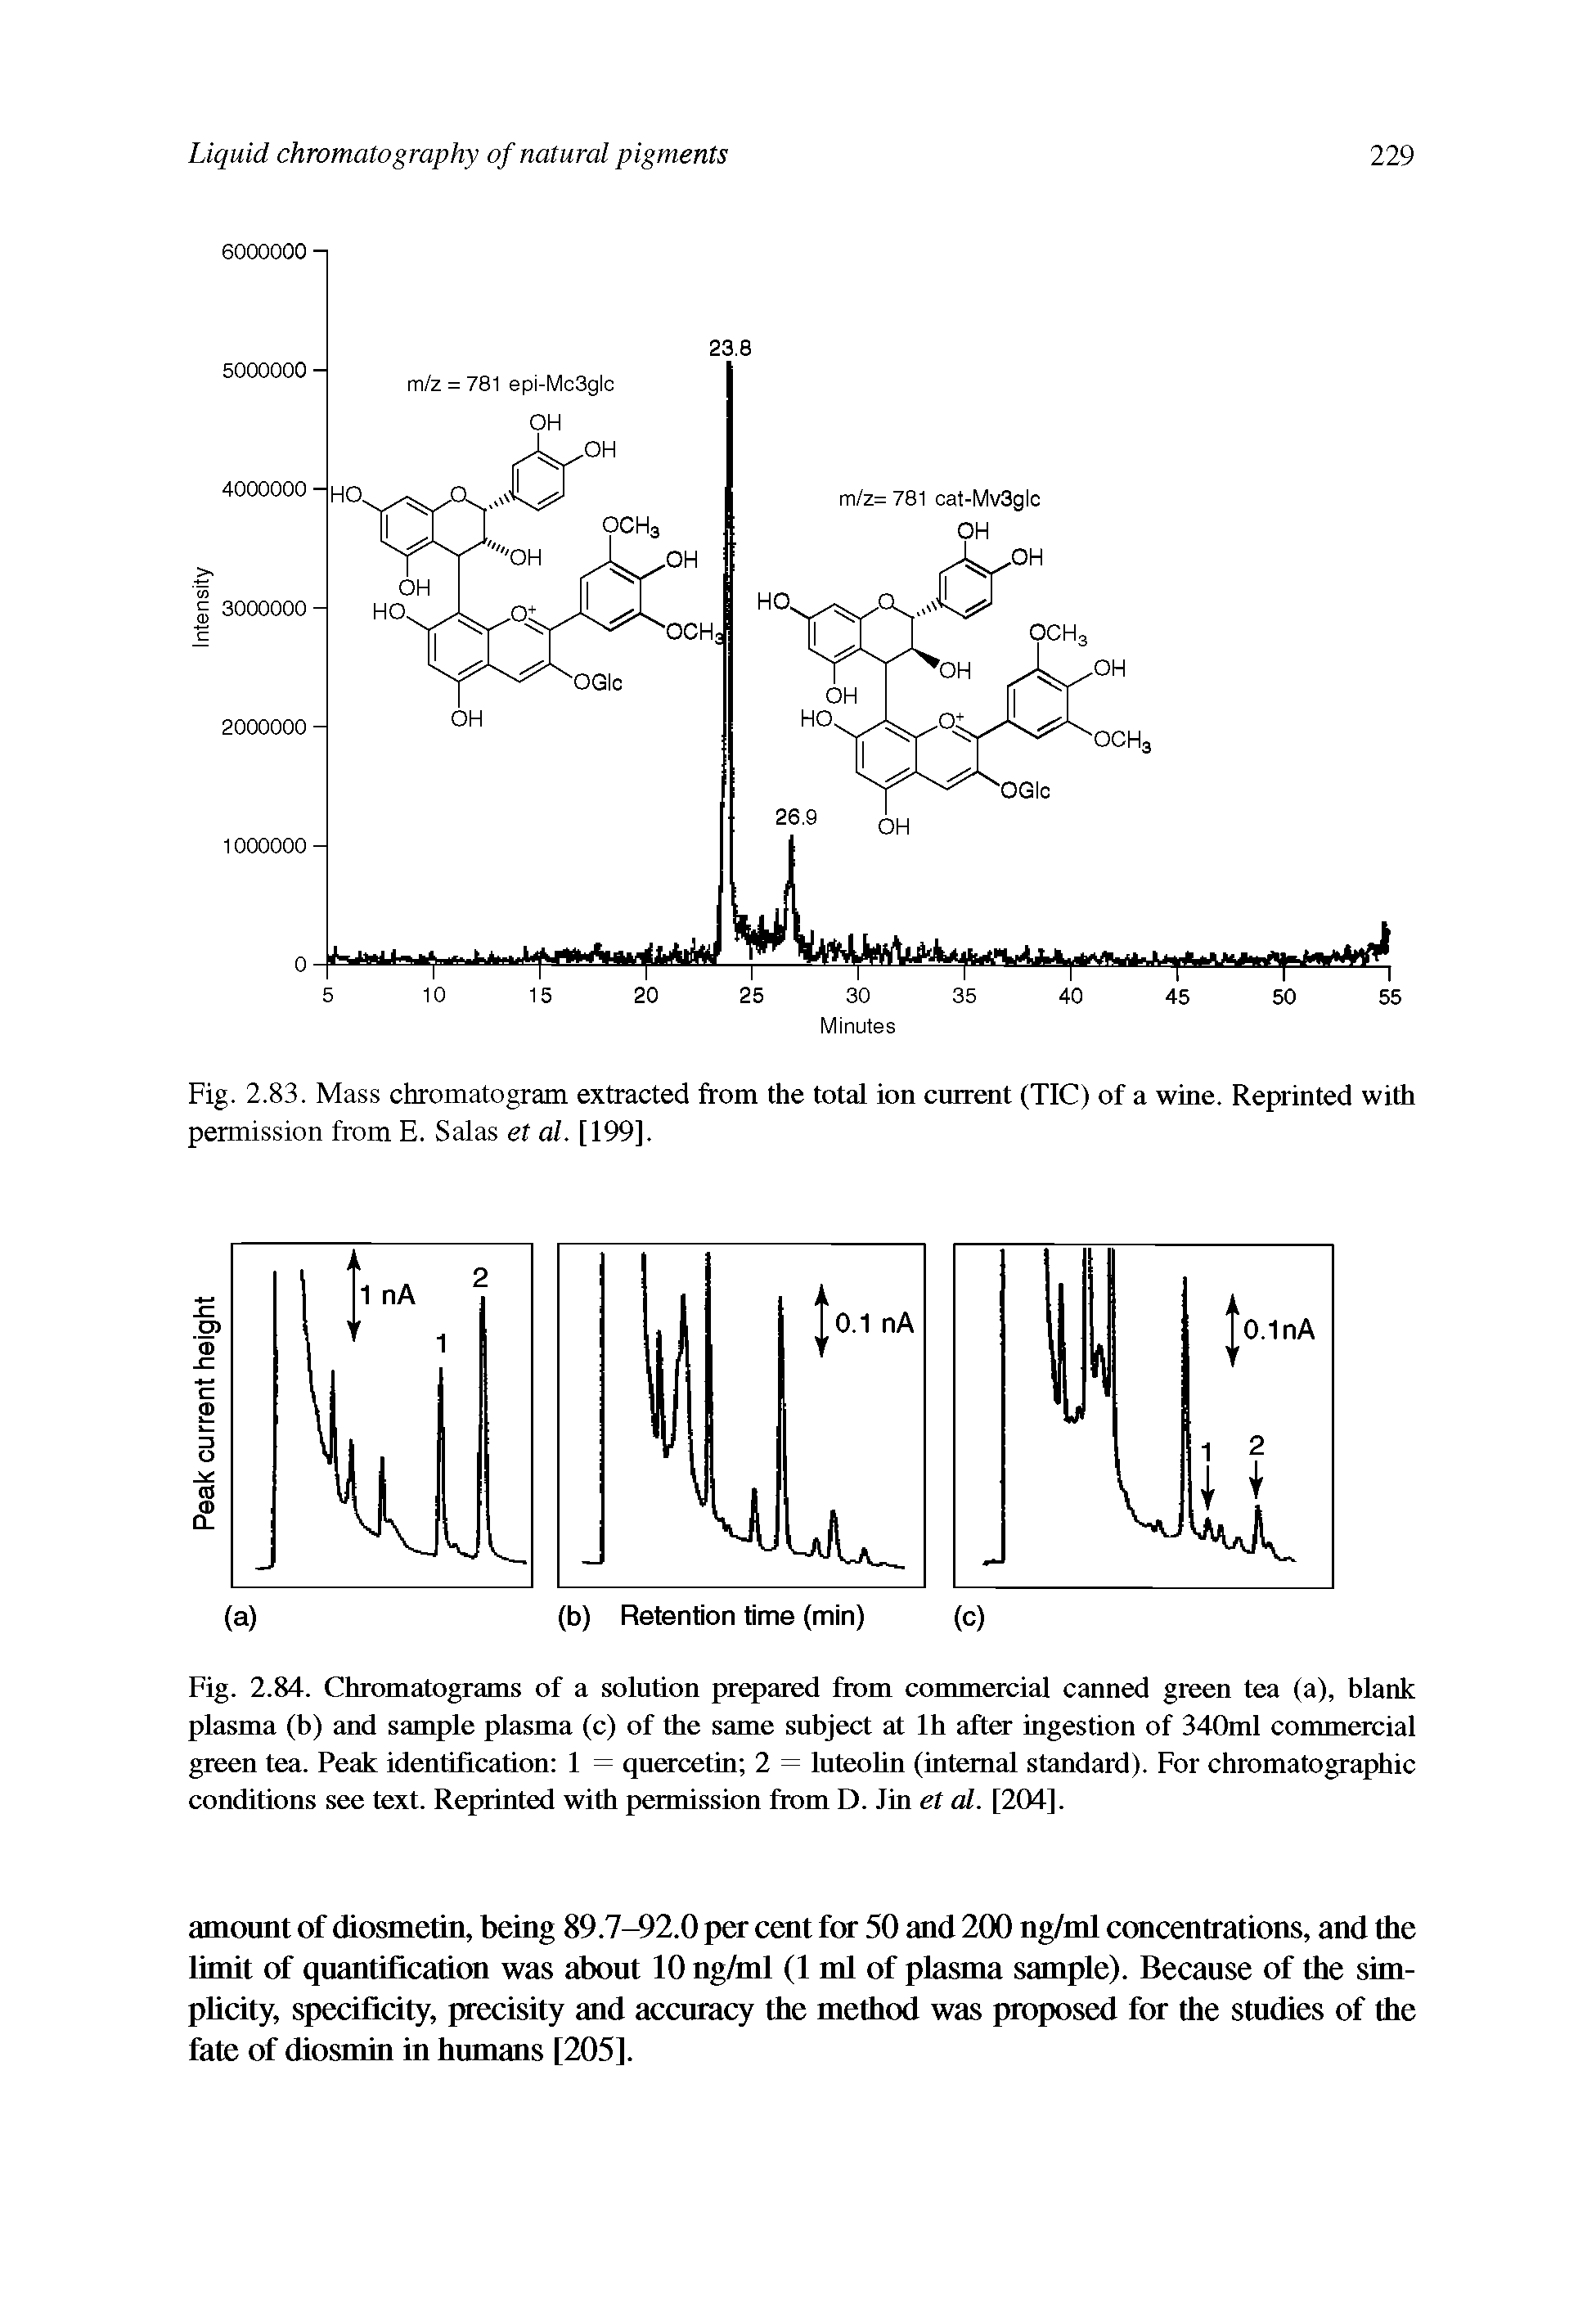 Fig. 2.84. Chromatograms of a solution prepared from commercial canned green tea (a), blank plasma (b) and sample plasma (c) of the same subject at lh after ingestion of 340ml commercial green tea. Peak identification 1 = quercetin 2 = luteohn (internal standard). For chromatographic conditions see text. Reprinted with permission from D. Jin et al. [204].